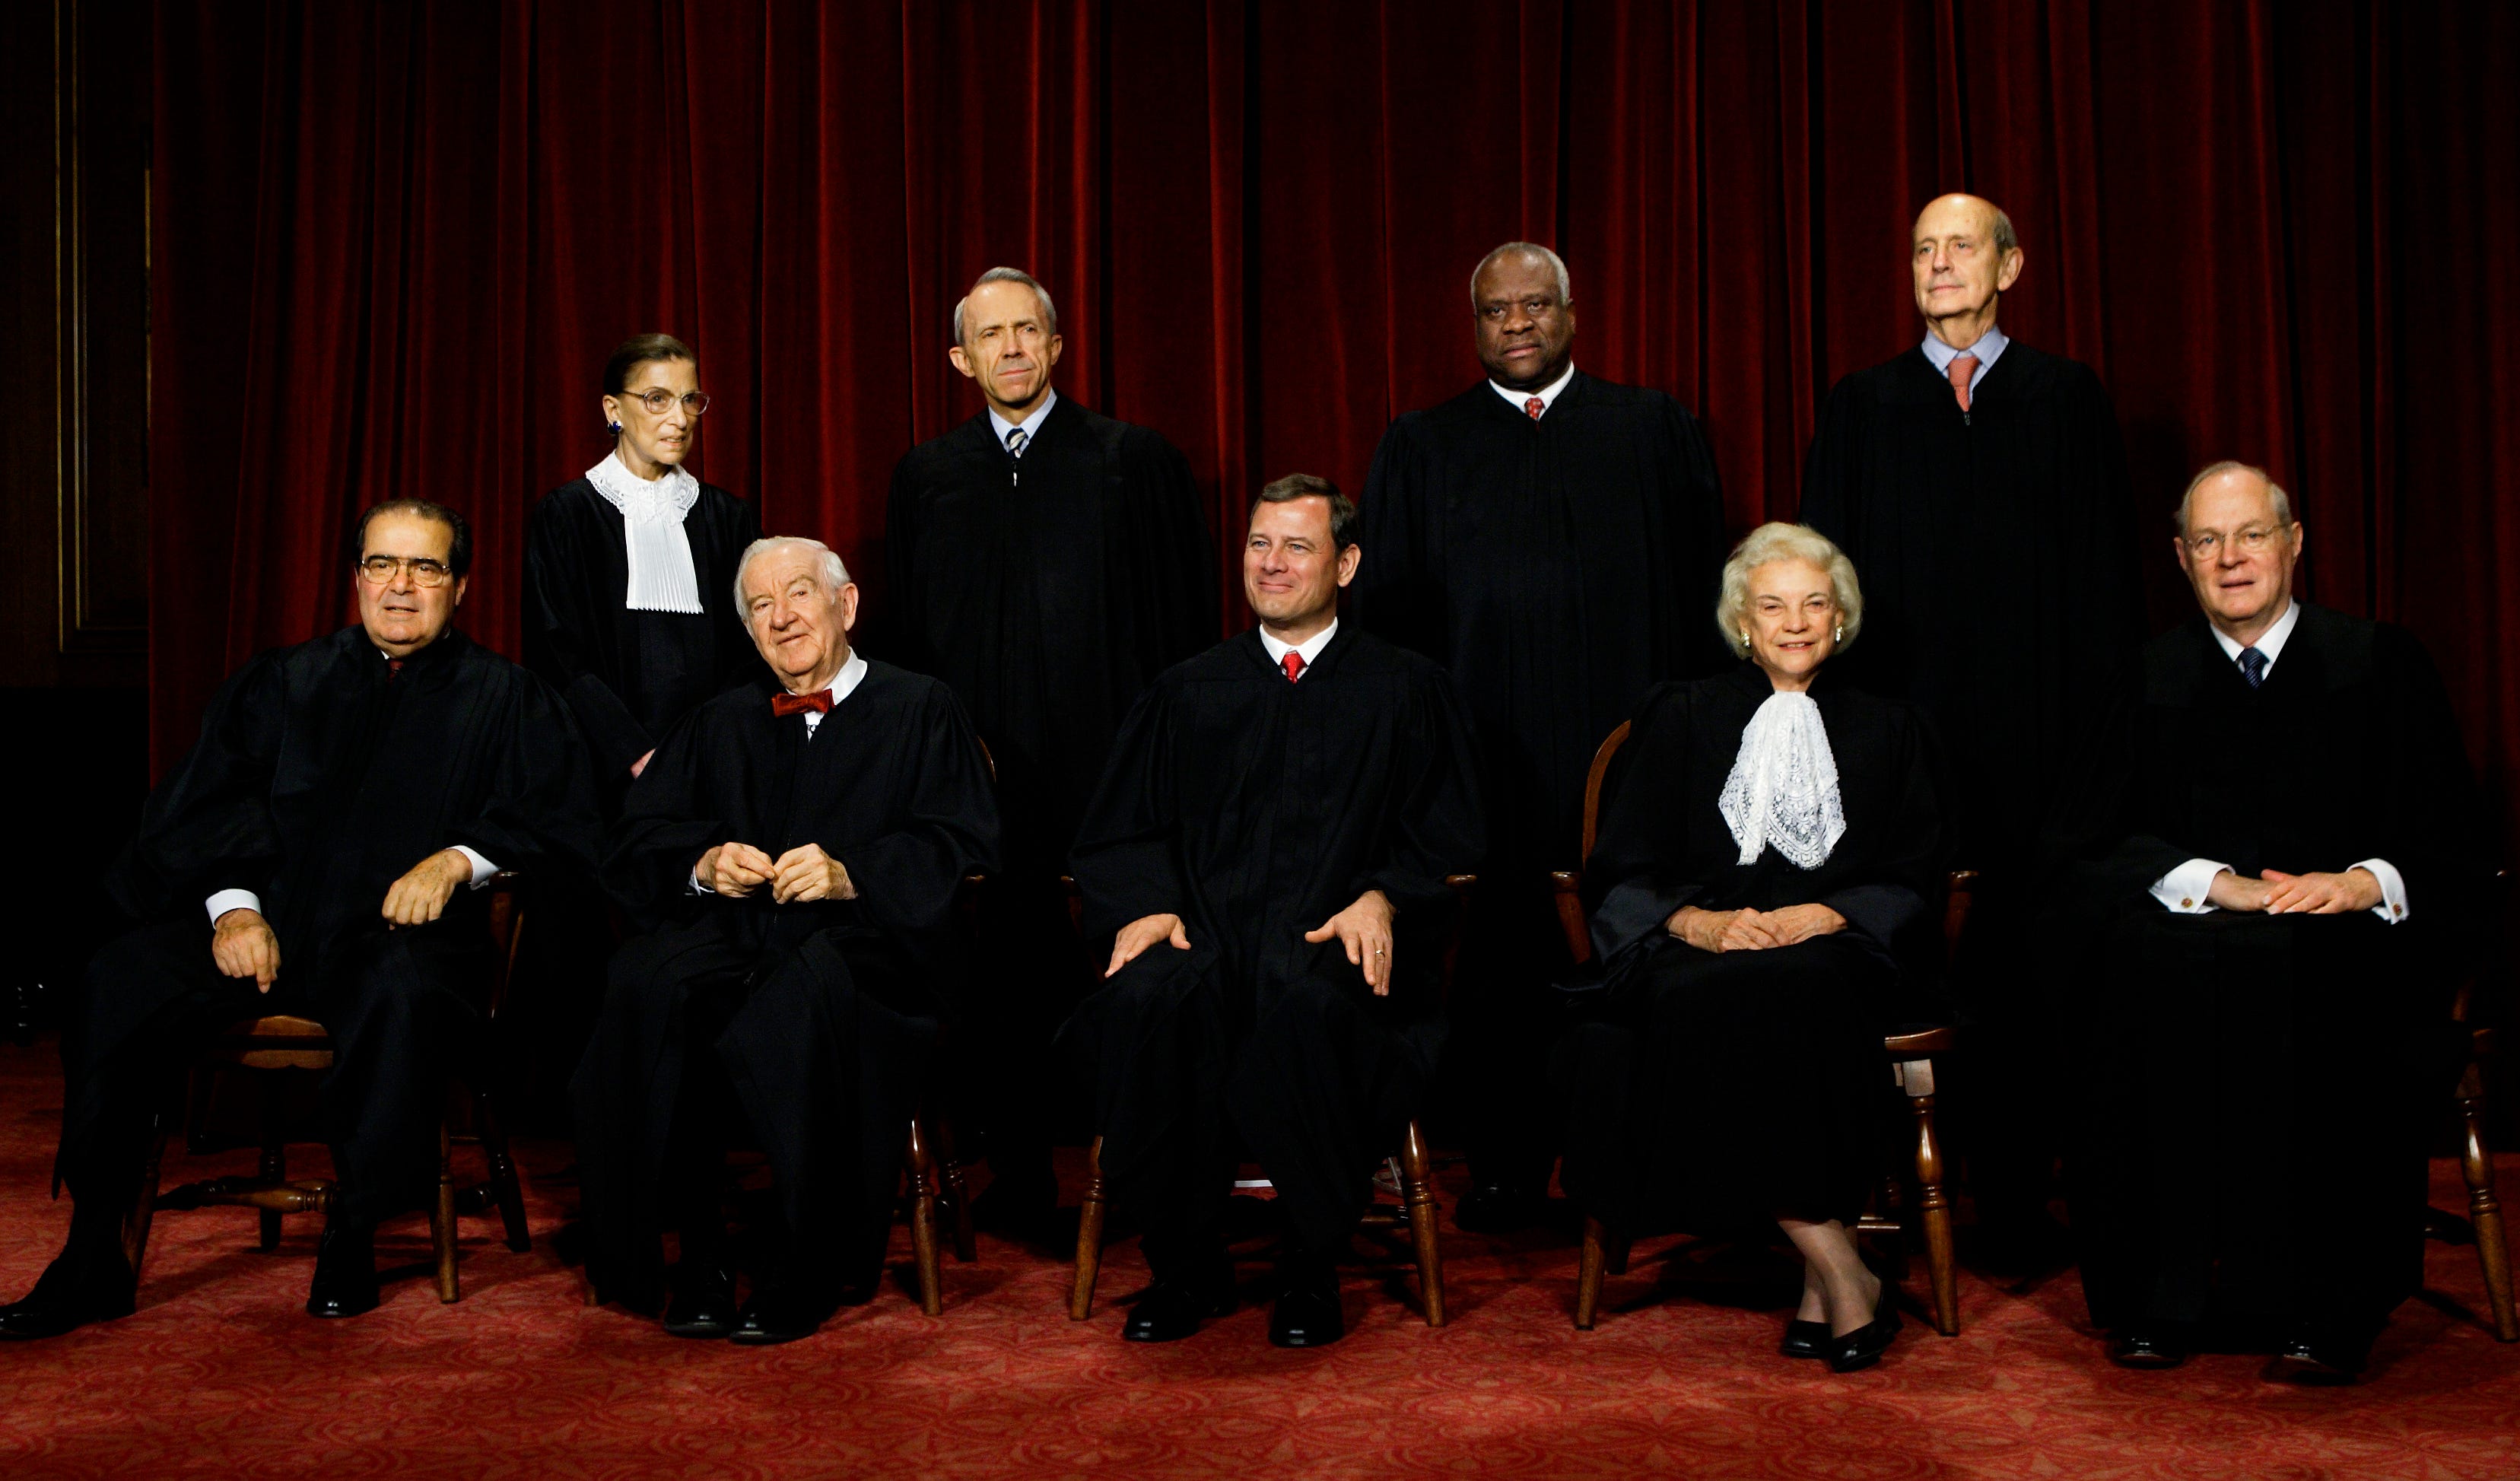 The justices of the U.S. Supreme Court gather for a group portrait at the Supreme Court Building in Washington, Monday, Oct. 31, 2005. Seated, from left: Antonin Scalia, John Paul Stevens, John G. Roberts Jr., Sandra Day O'Connor, and Anthony M. Kennedy. Standing, from left: Ruth Bader Ginsburg, David Souter, Clarence Thomas, and Stephen Breyer.